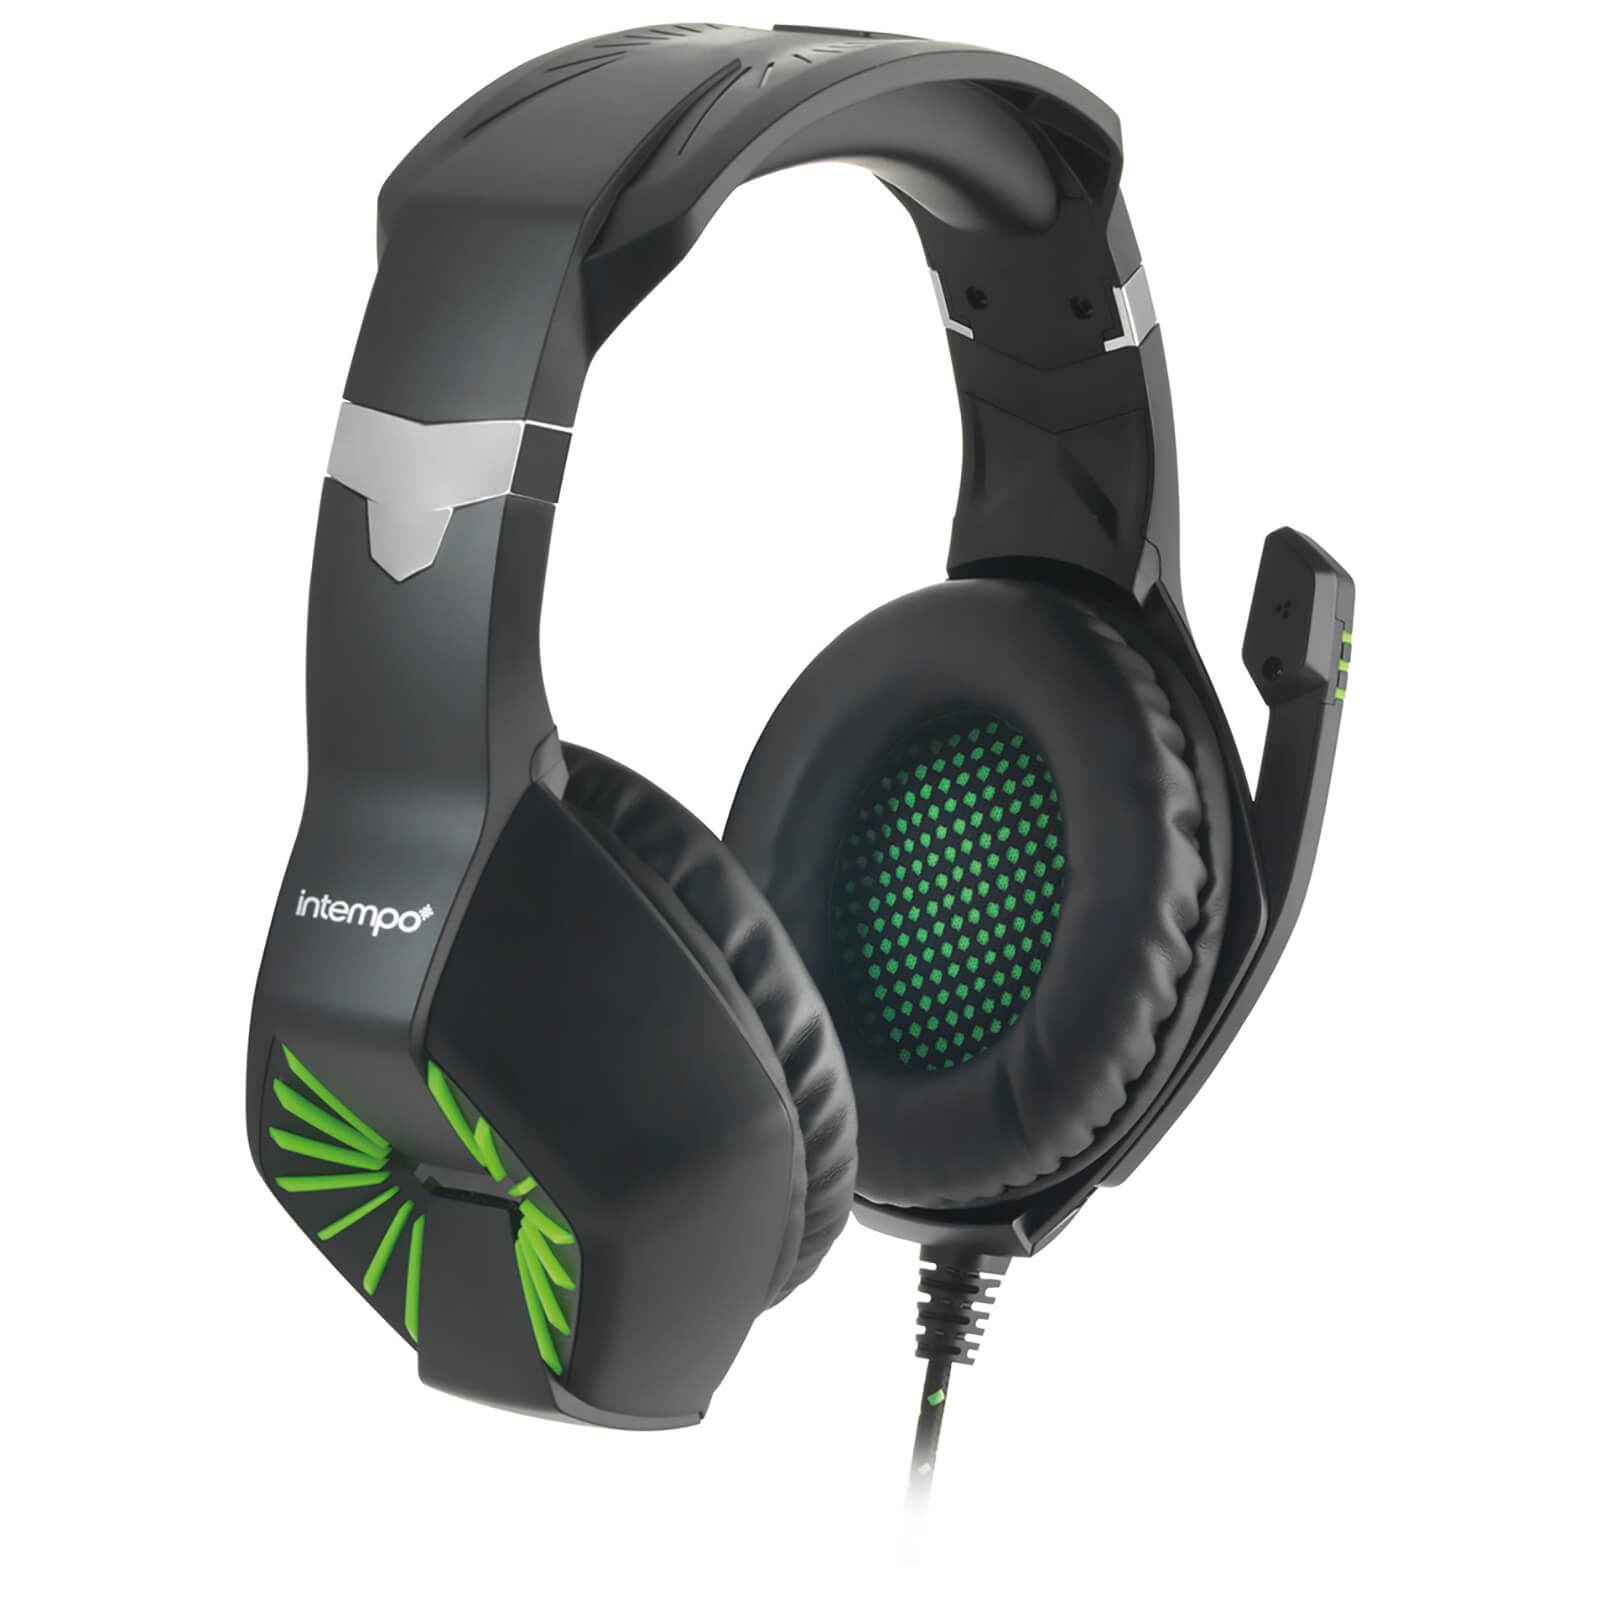 Intempo Gaming Headset - Green